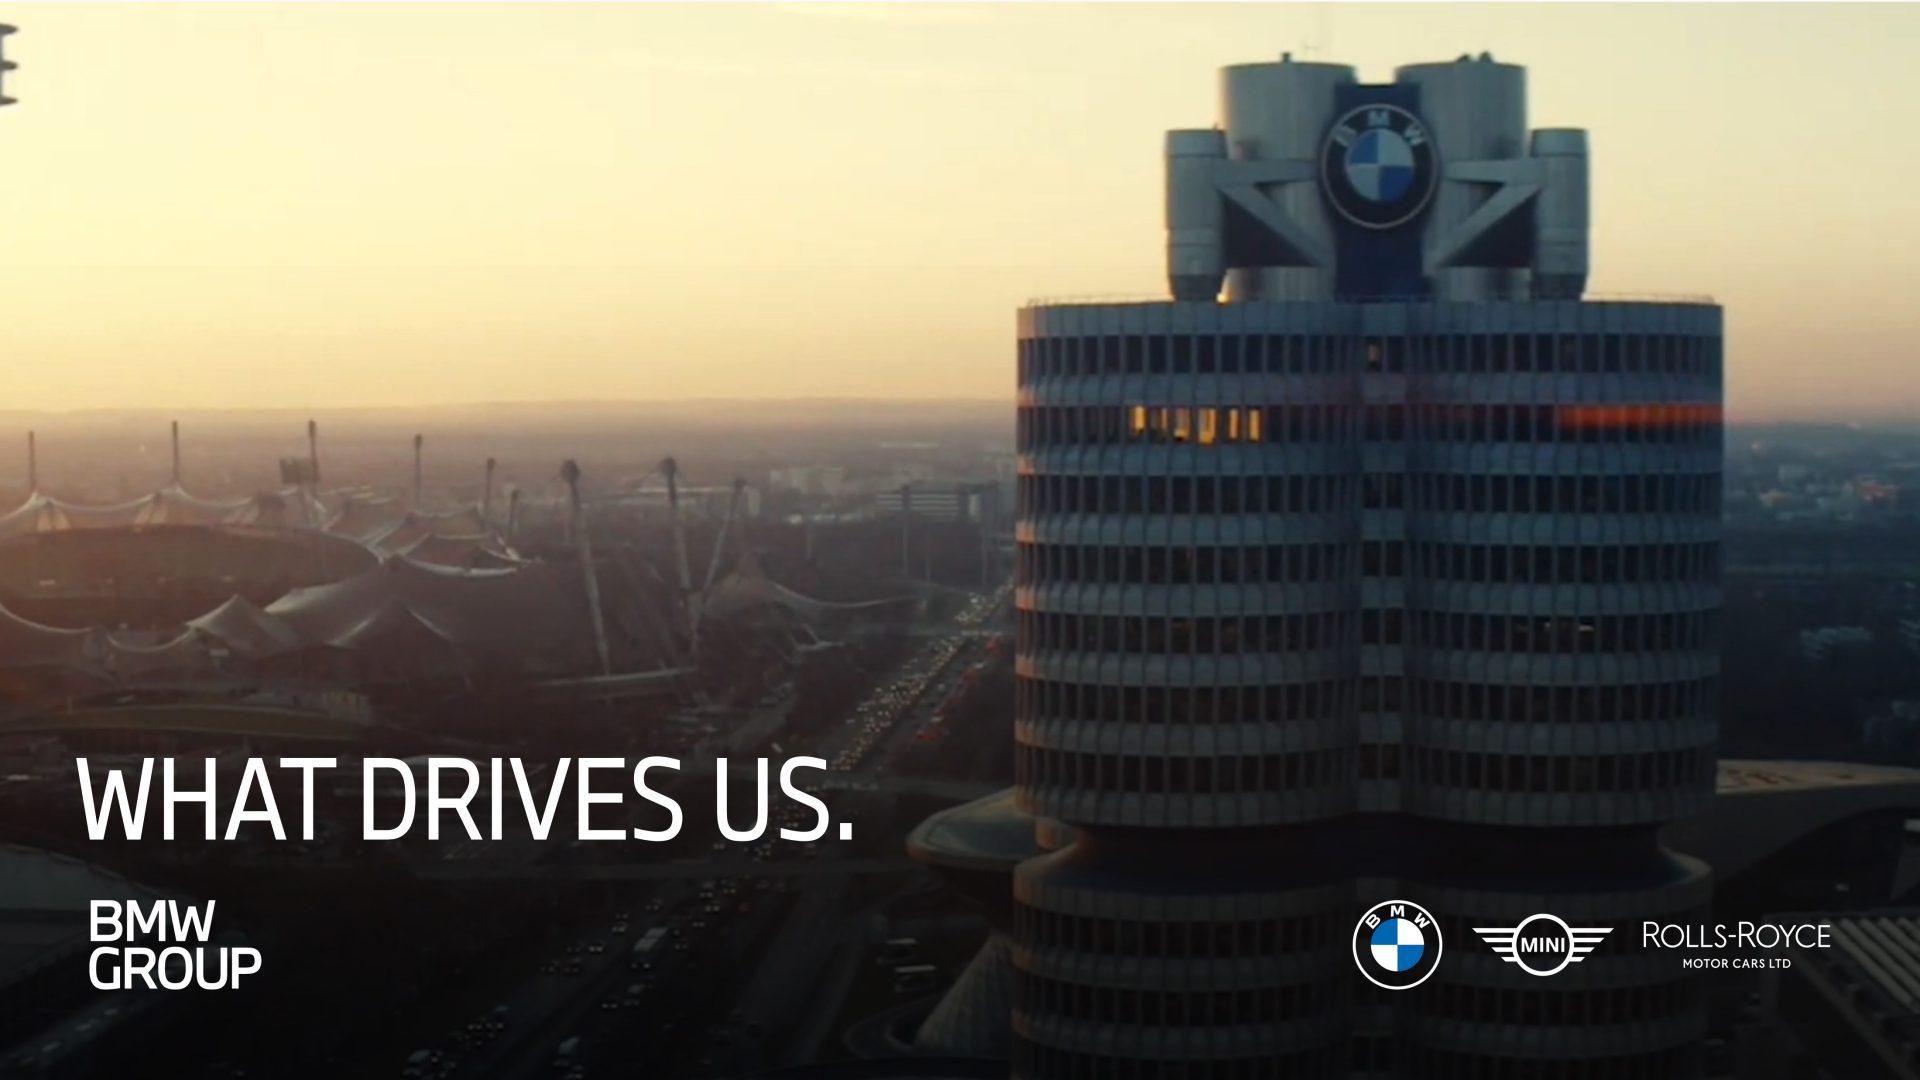 This video shows the culture of the BMW Group.